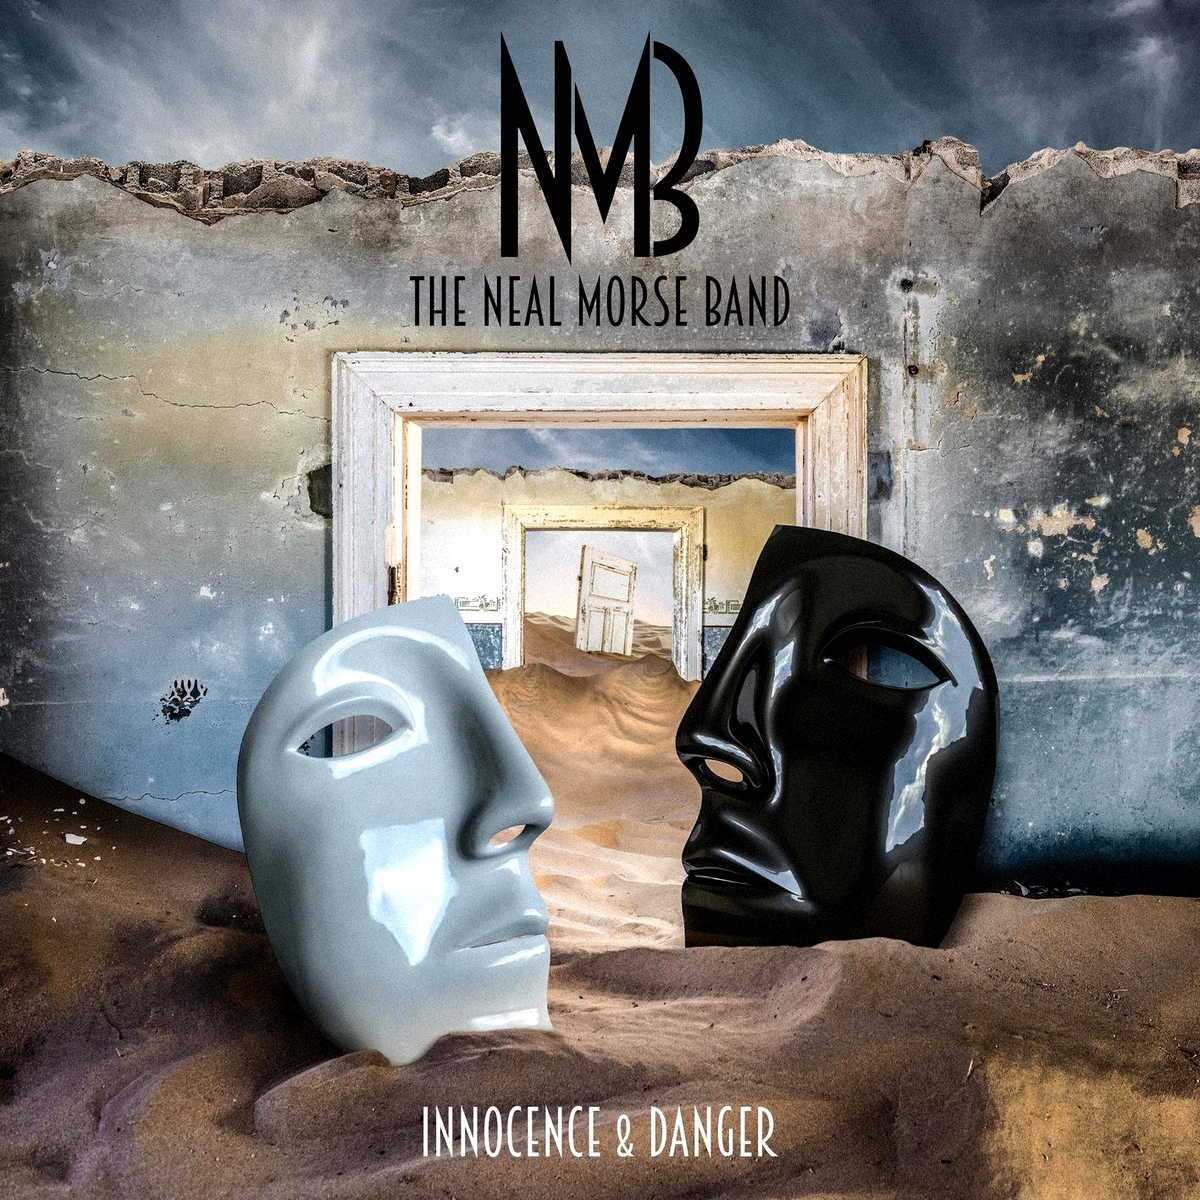 Review: The Neal Morse Band “Innocence & Danger”